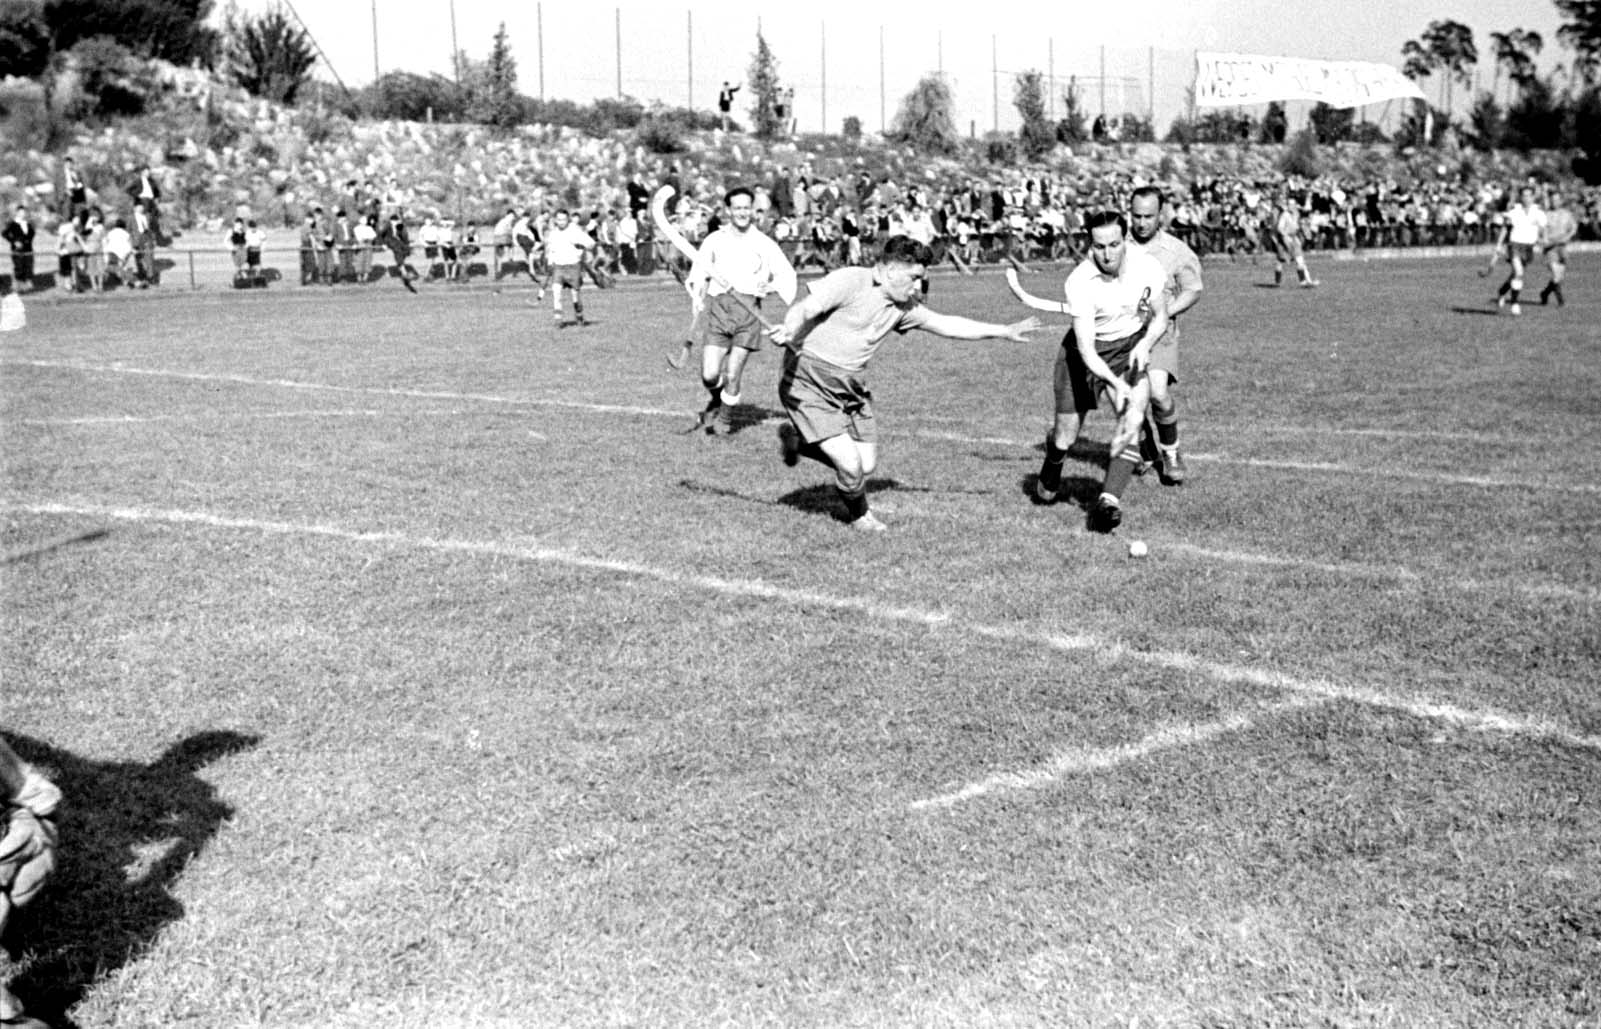 Berlin, Germany, 1937, a hockey game at the "Bar-Kochba" international sports games with the participation of "Hakoach Vienna". The games took place at the Grunewald field and included soccer, handball and hockey